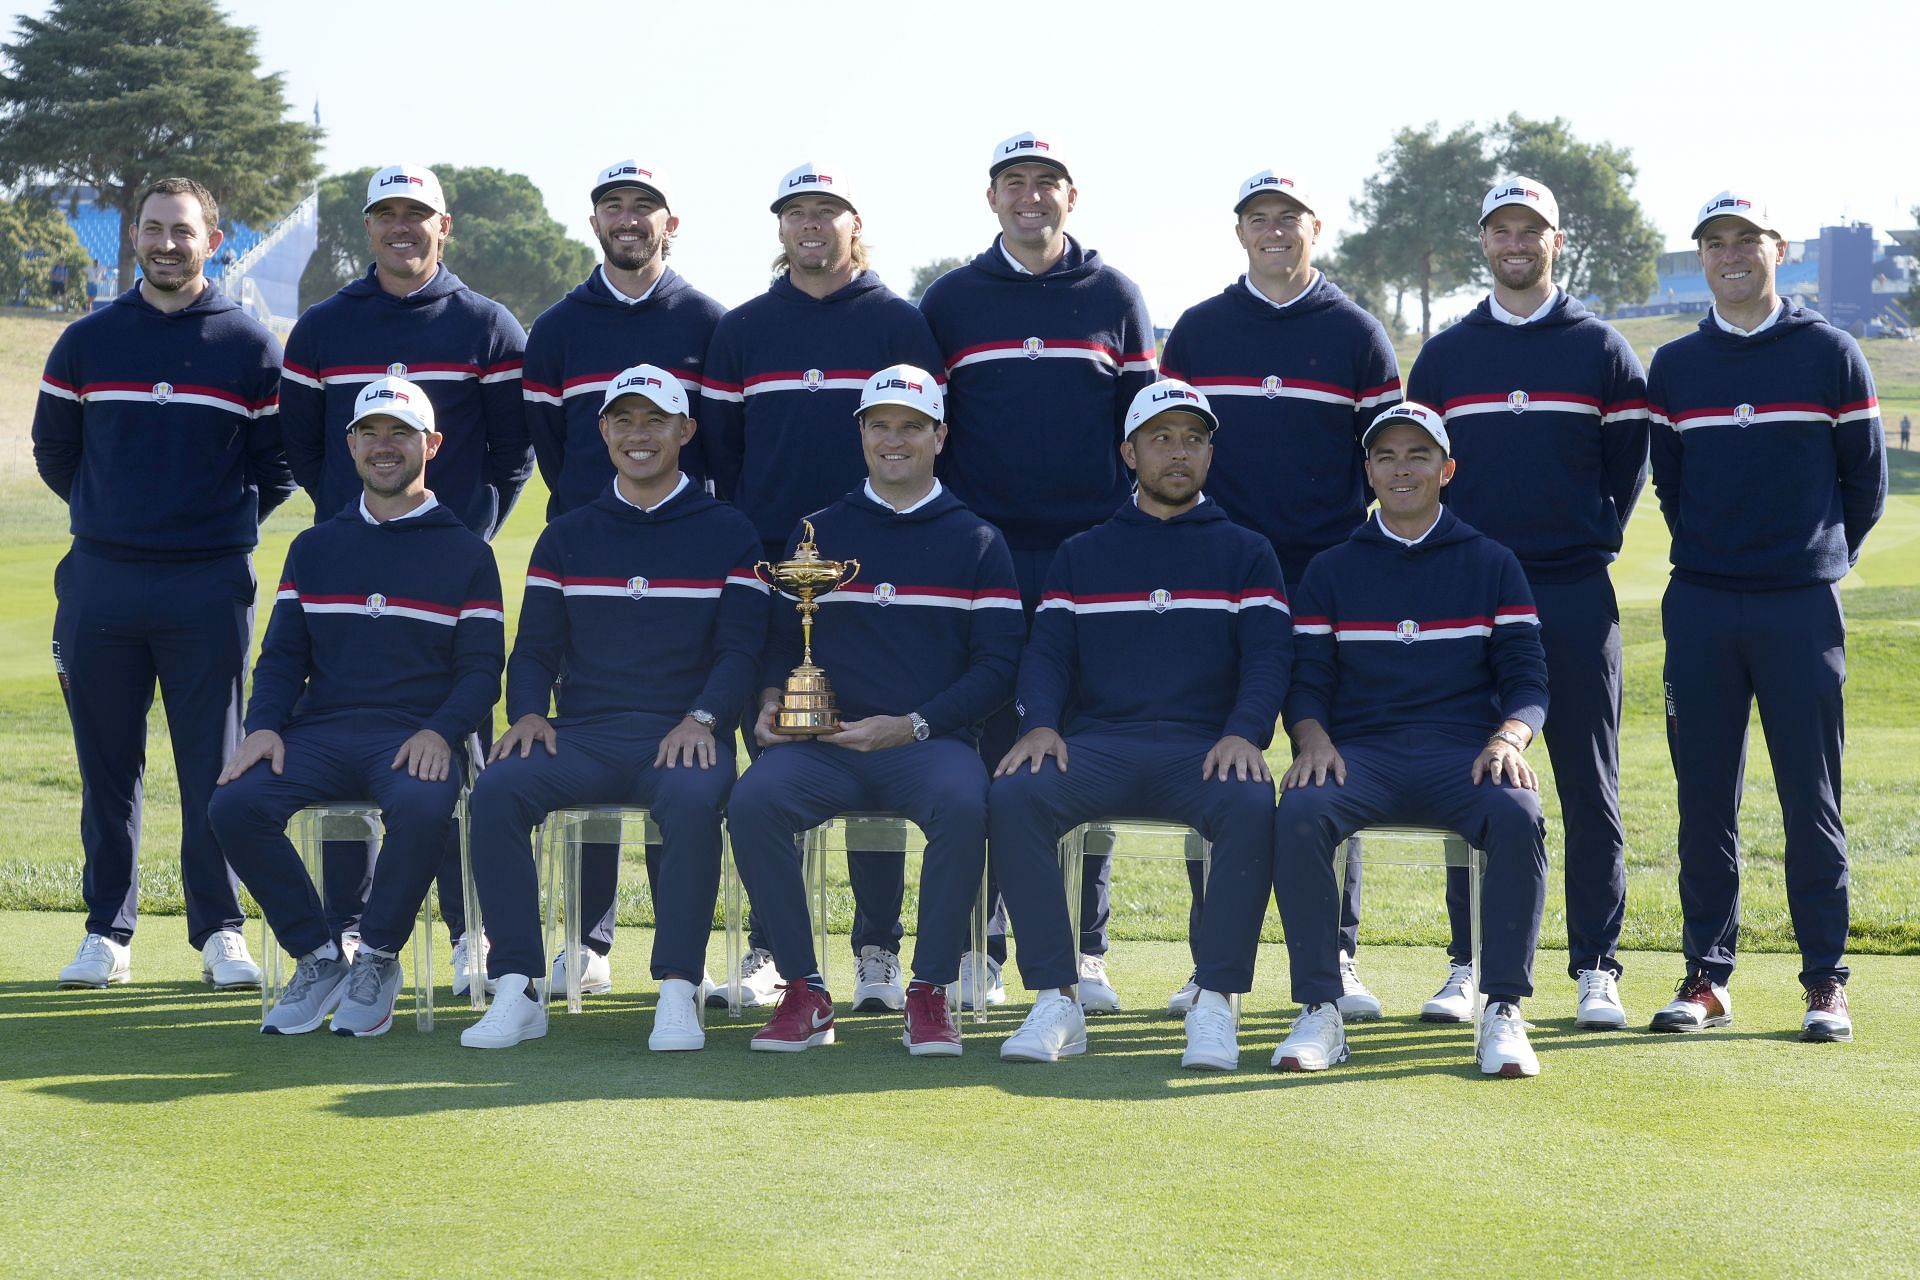 The United States team poses for the cameras (Image via AP Photo)